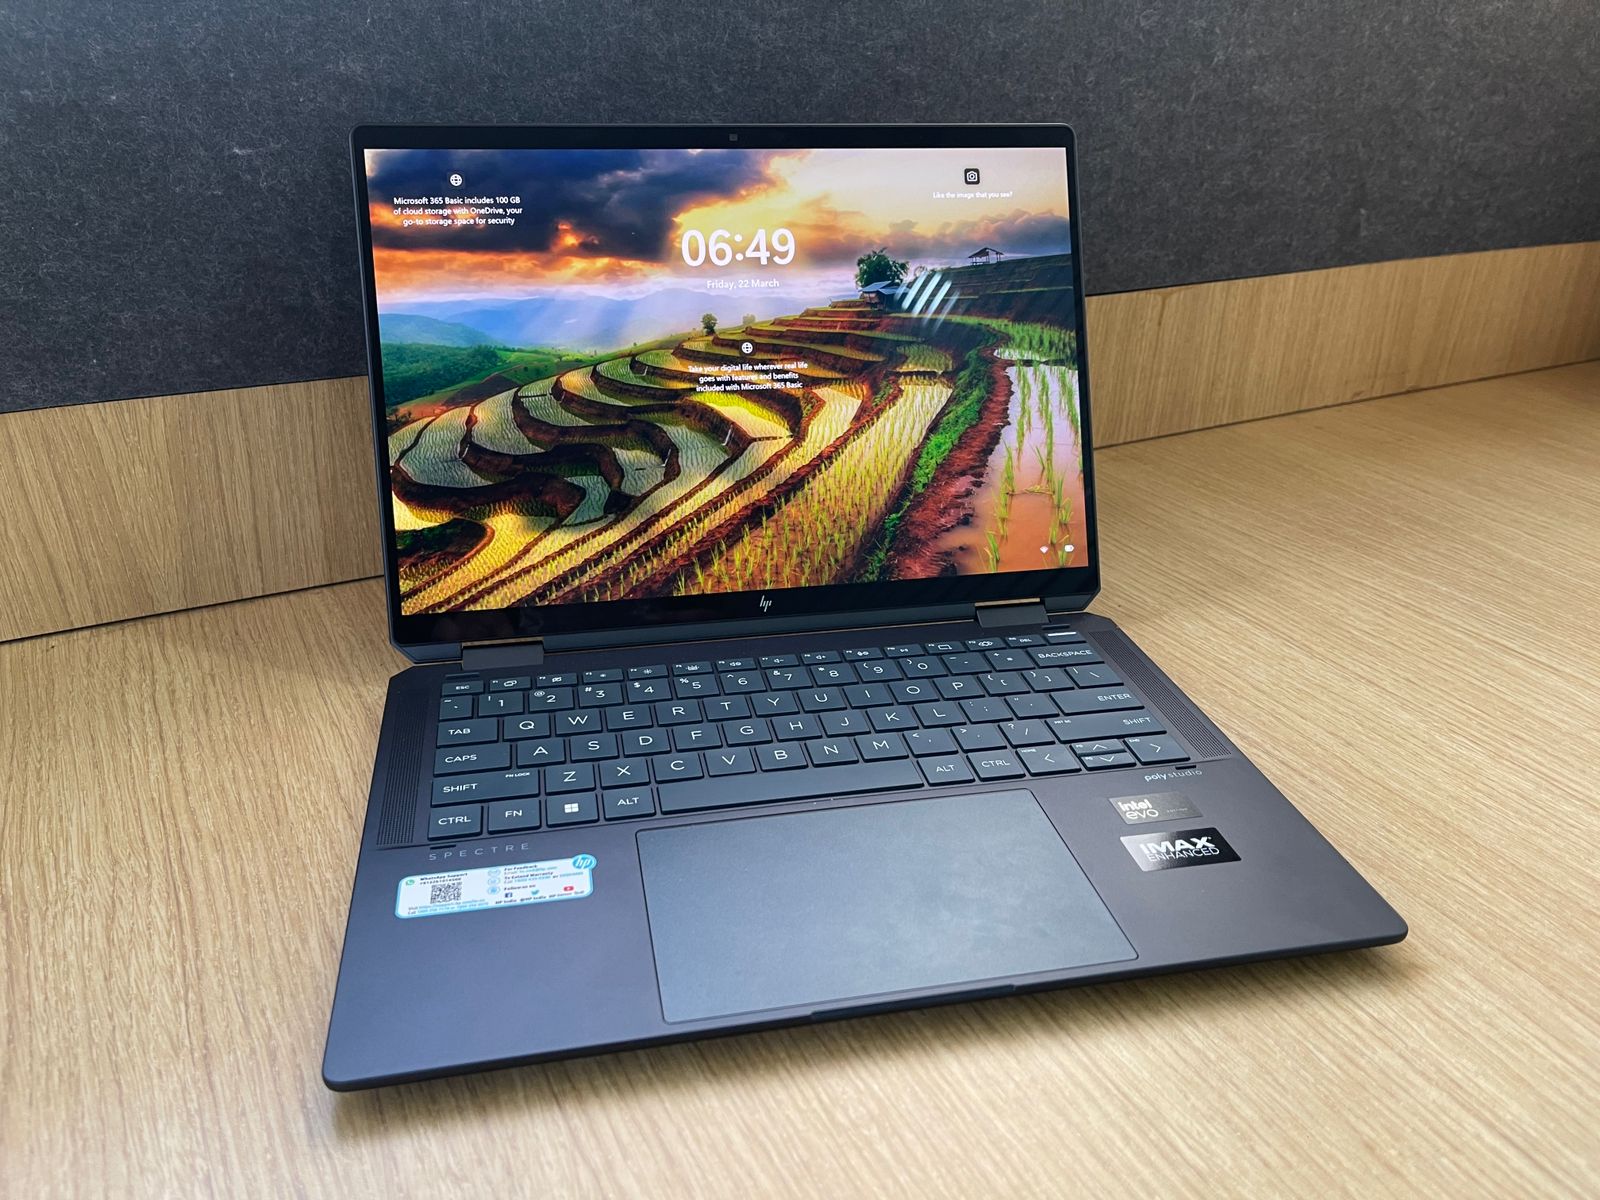 HP Spectre x360 14: Performance and Features